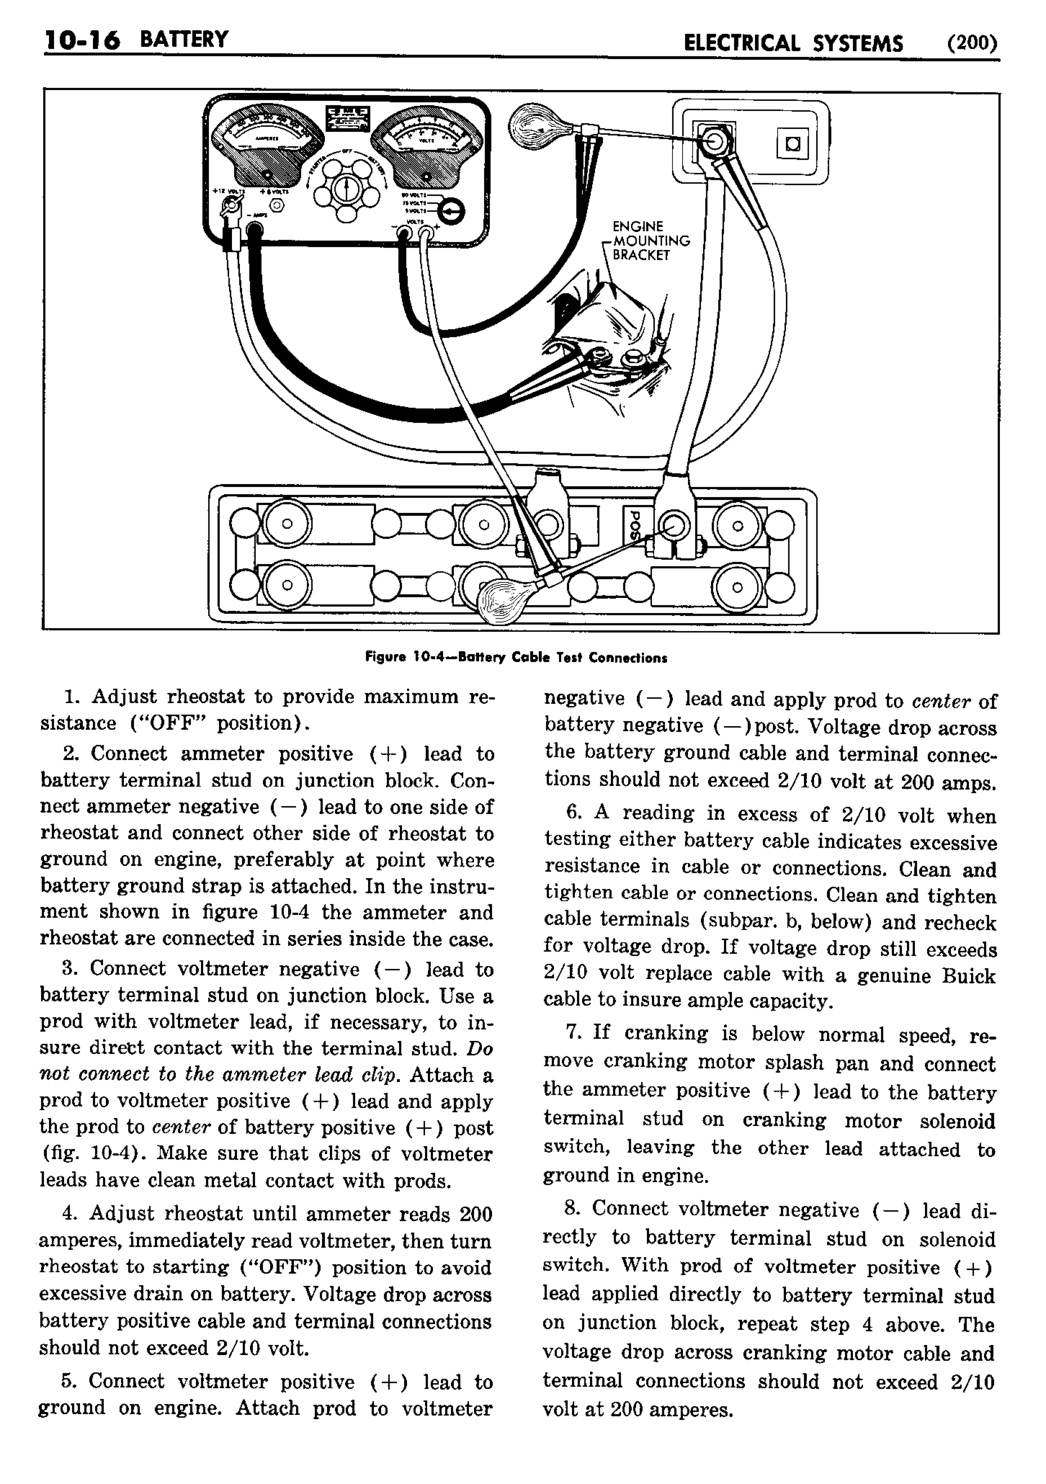 n_11 1953 Buick Shop Manual - Electrical Systems-016-016.jpg